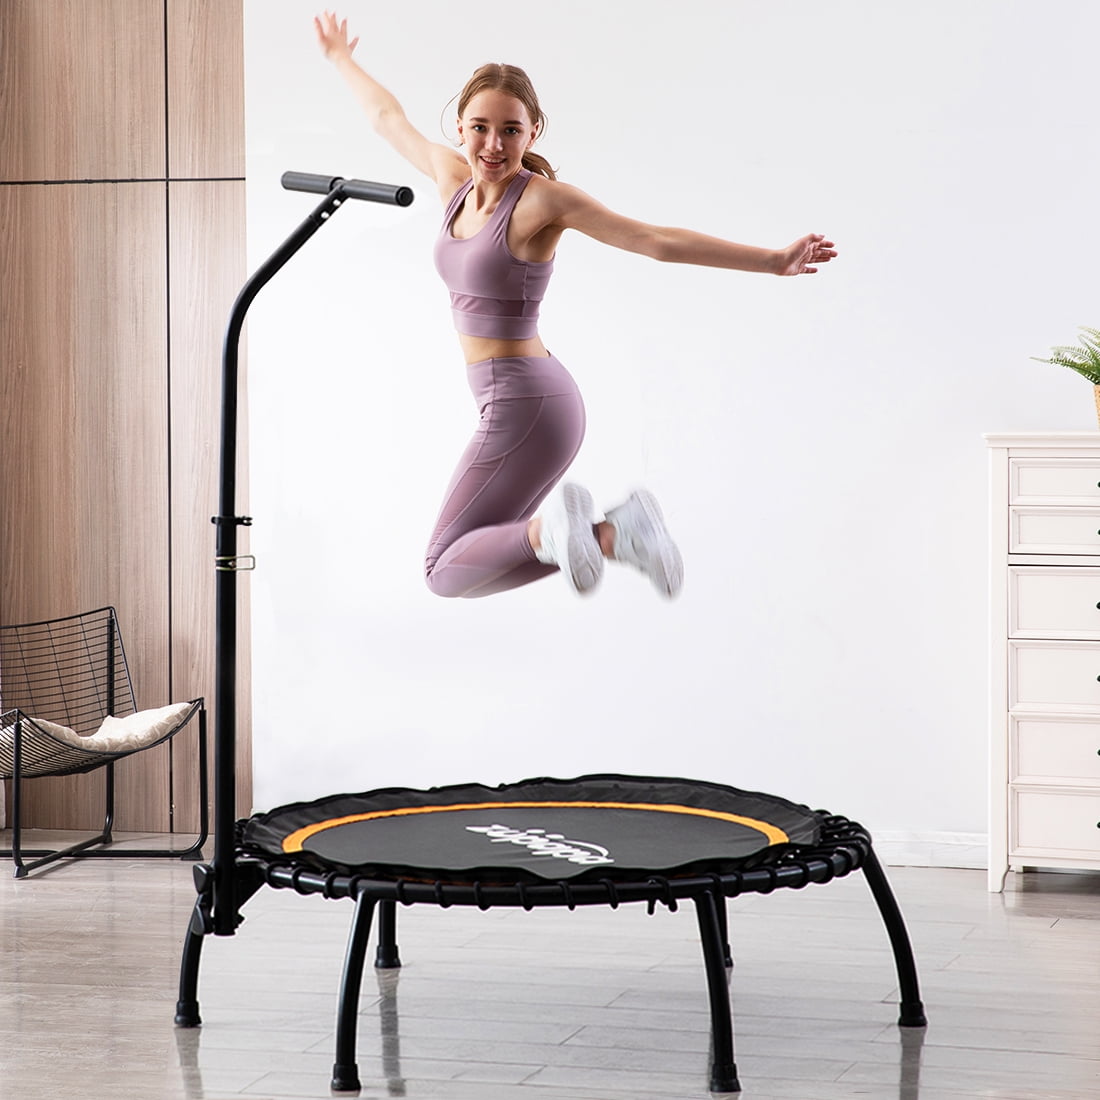 MOVTOTOP 48 Foldable Mini Trampoline,Fitness Rebounder Trampoline with Adjustable Foam Handle,Outdoor/Indoor Trampoline for Kids Adults-Max Load 330lbs 